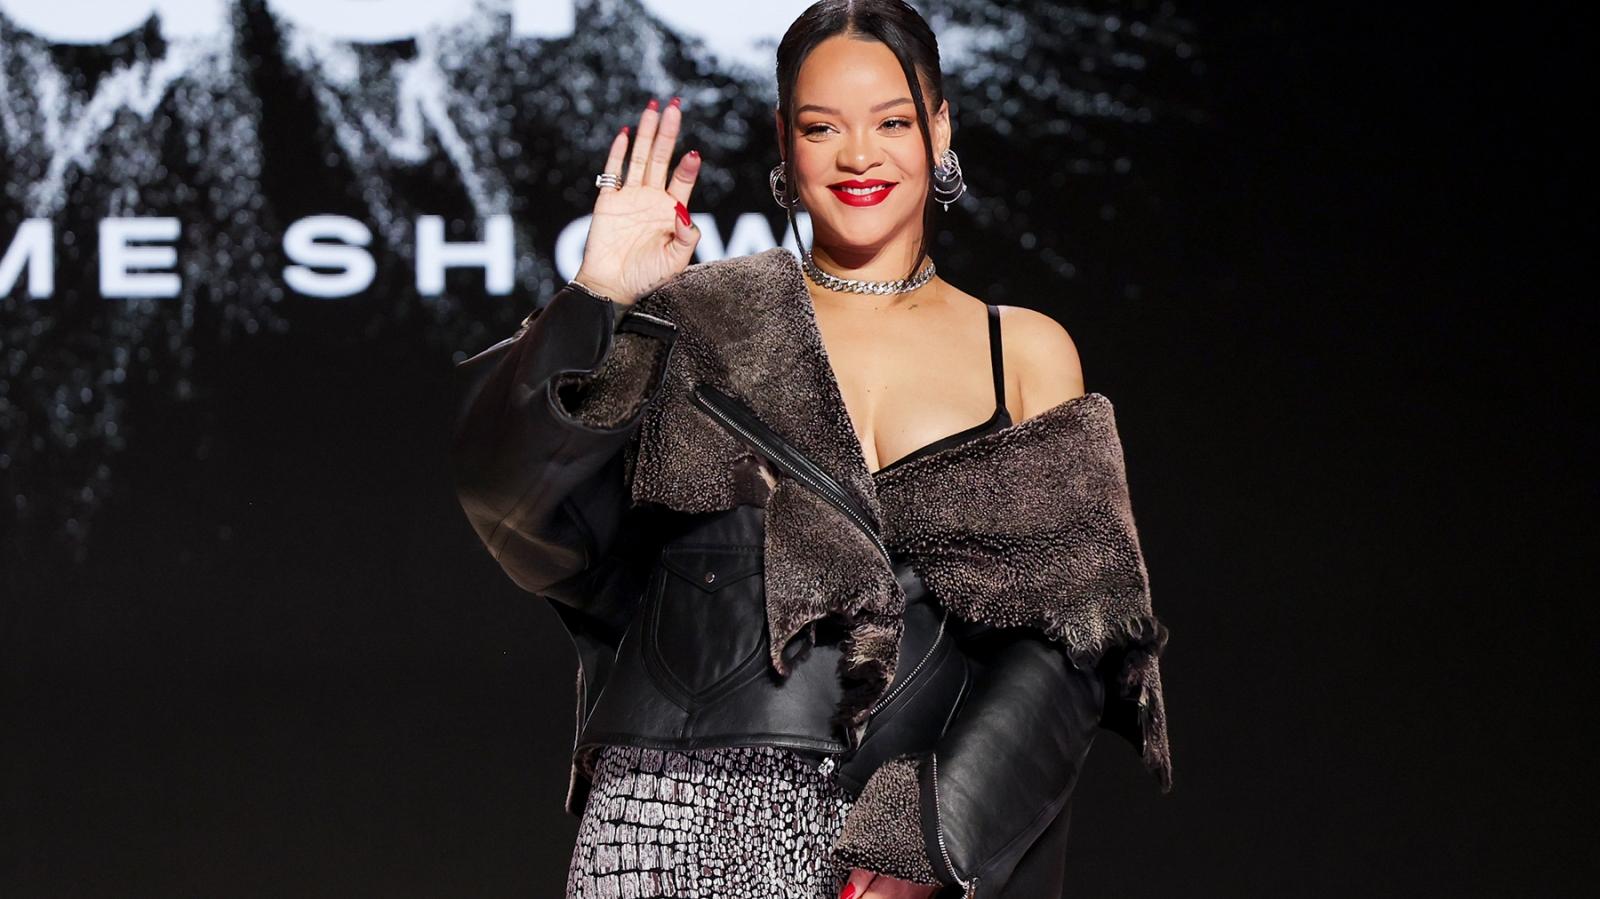 Rihanna Reveals There Are 39 Versions of Her Super Bowl Halftime